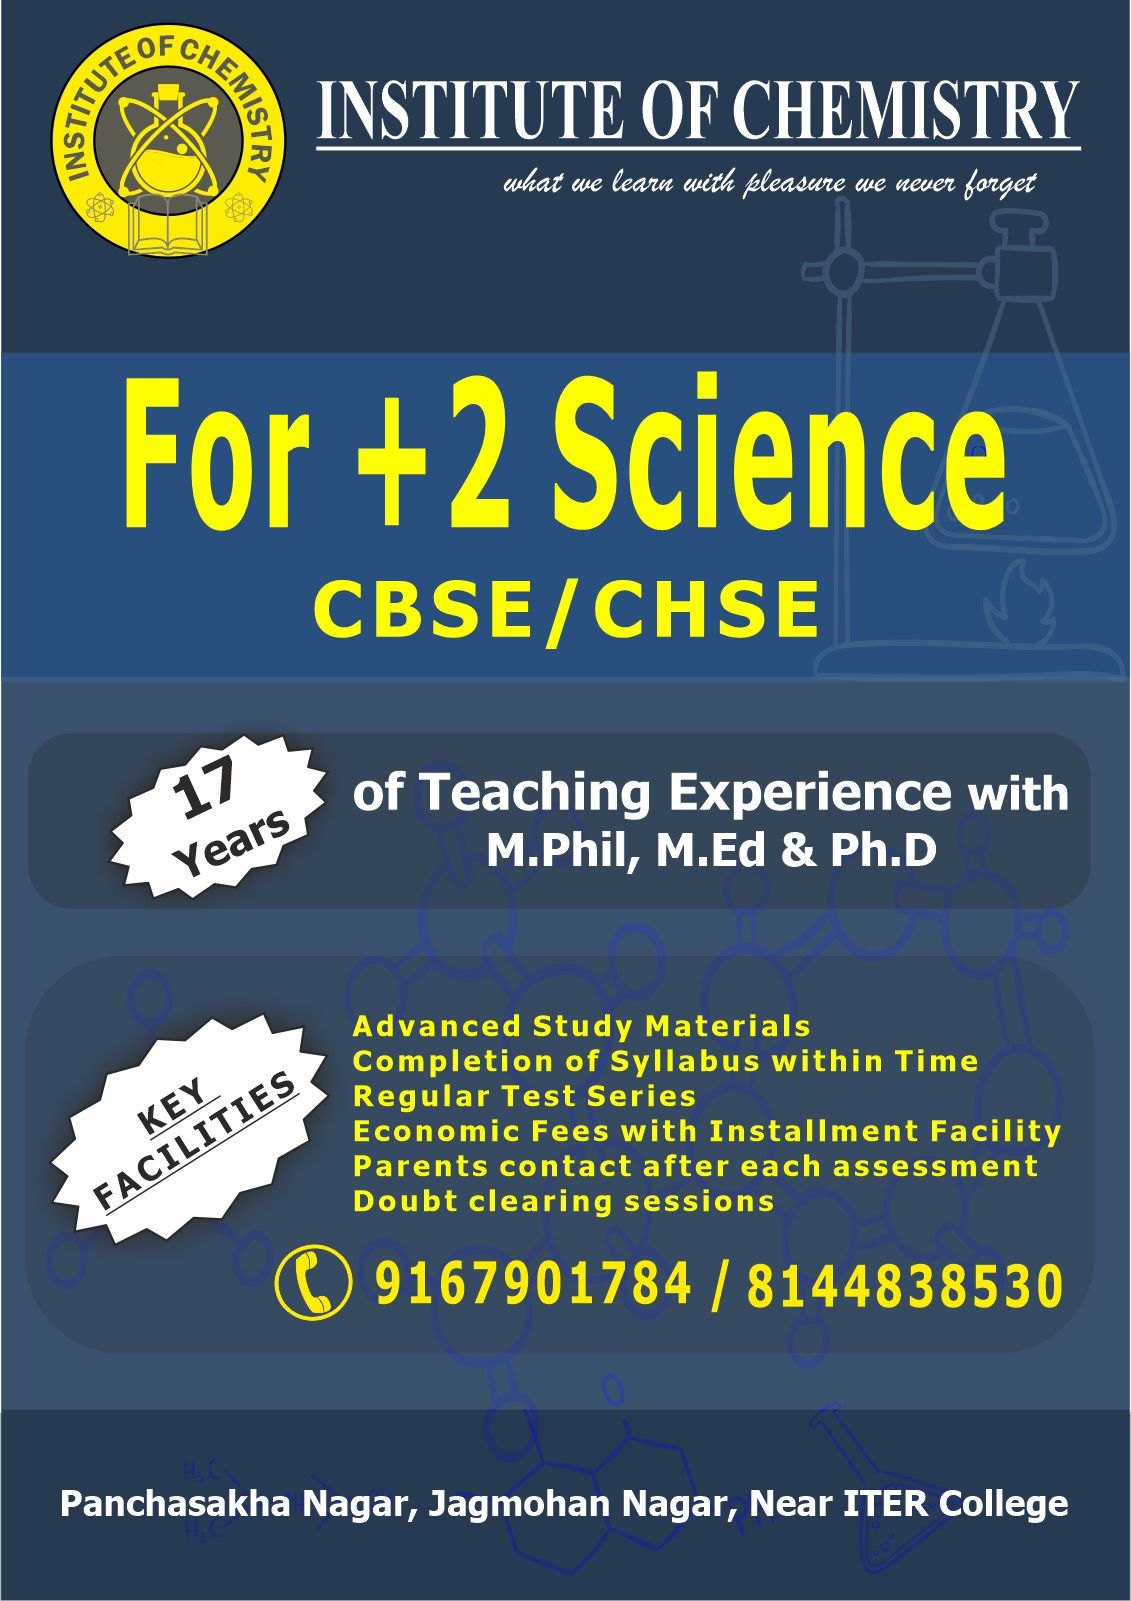 CHEMISTRY CLASSES FOR +2 SCIENCE